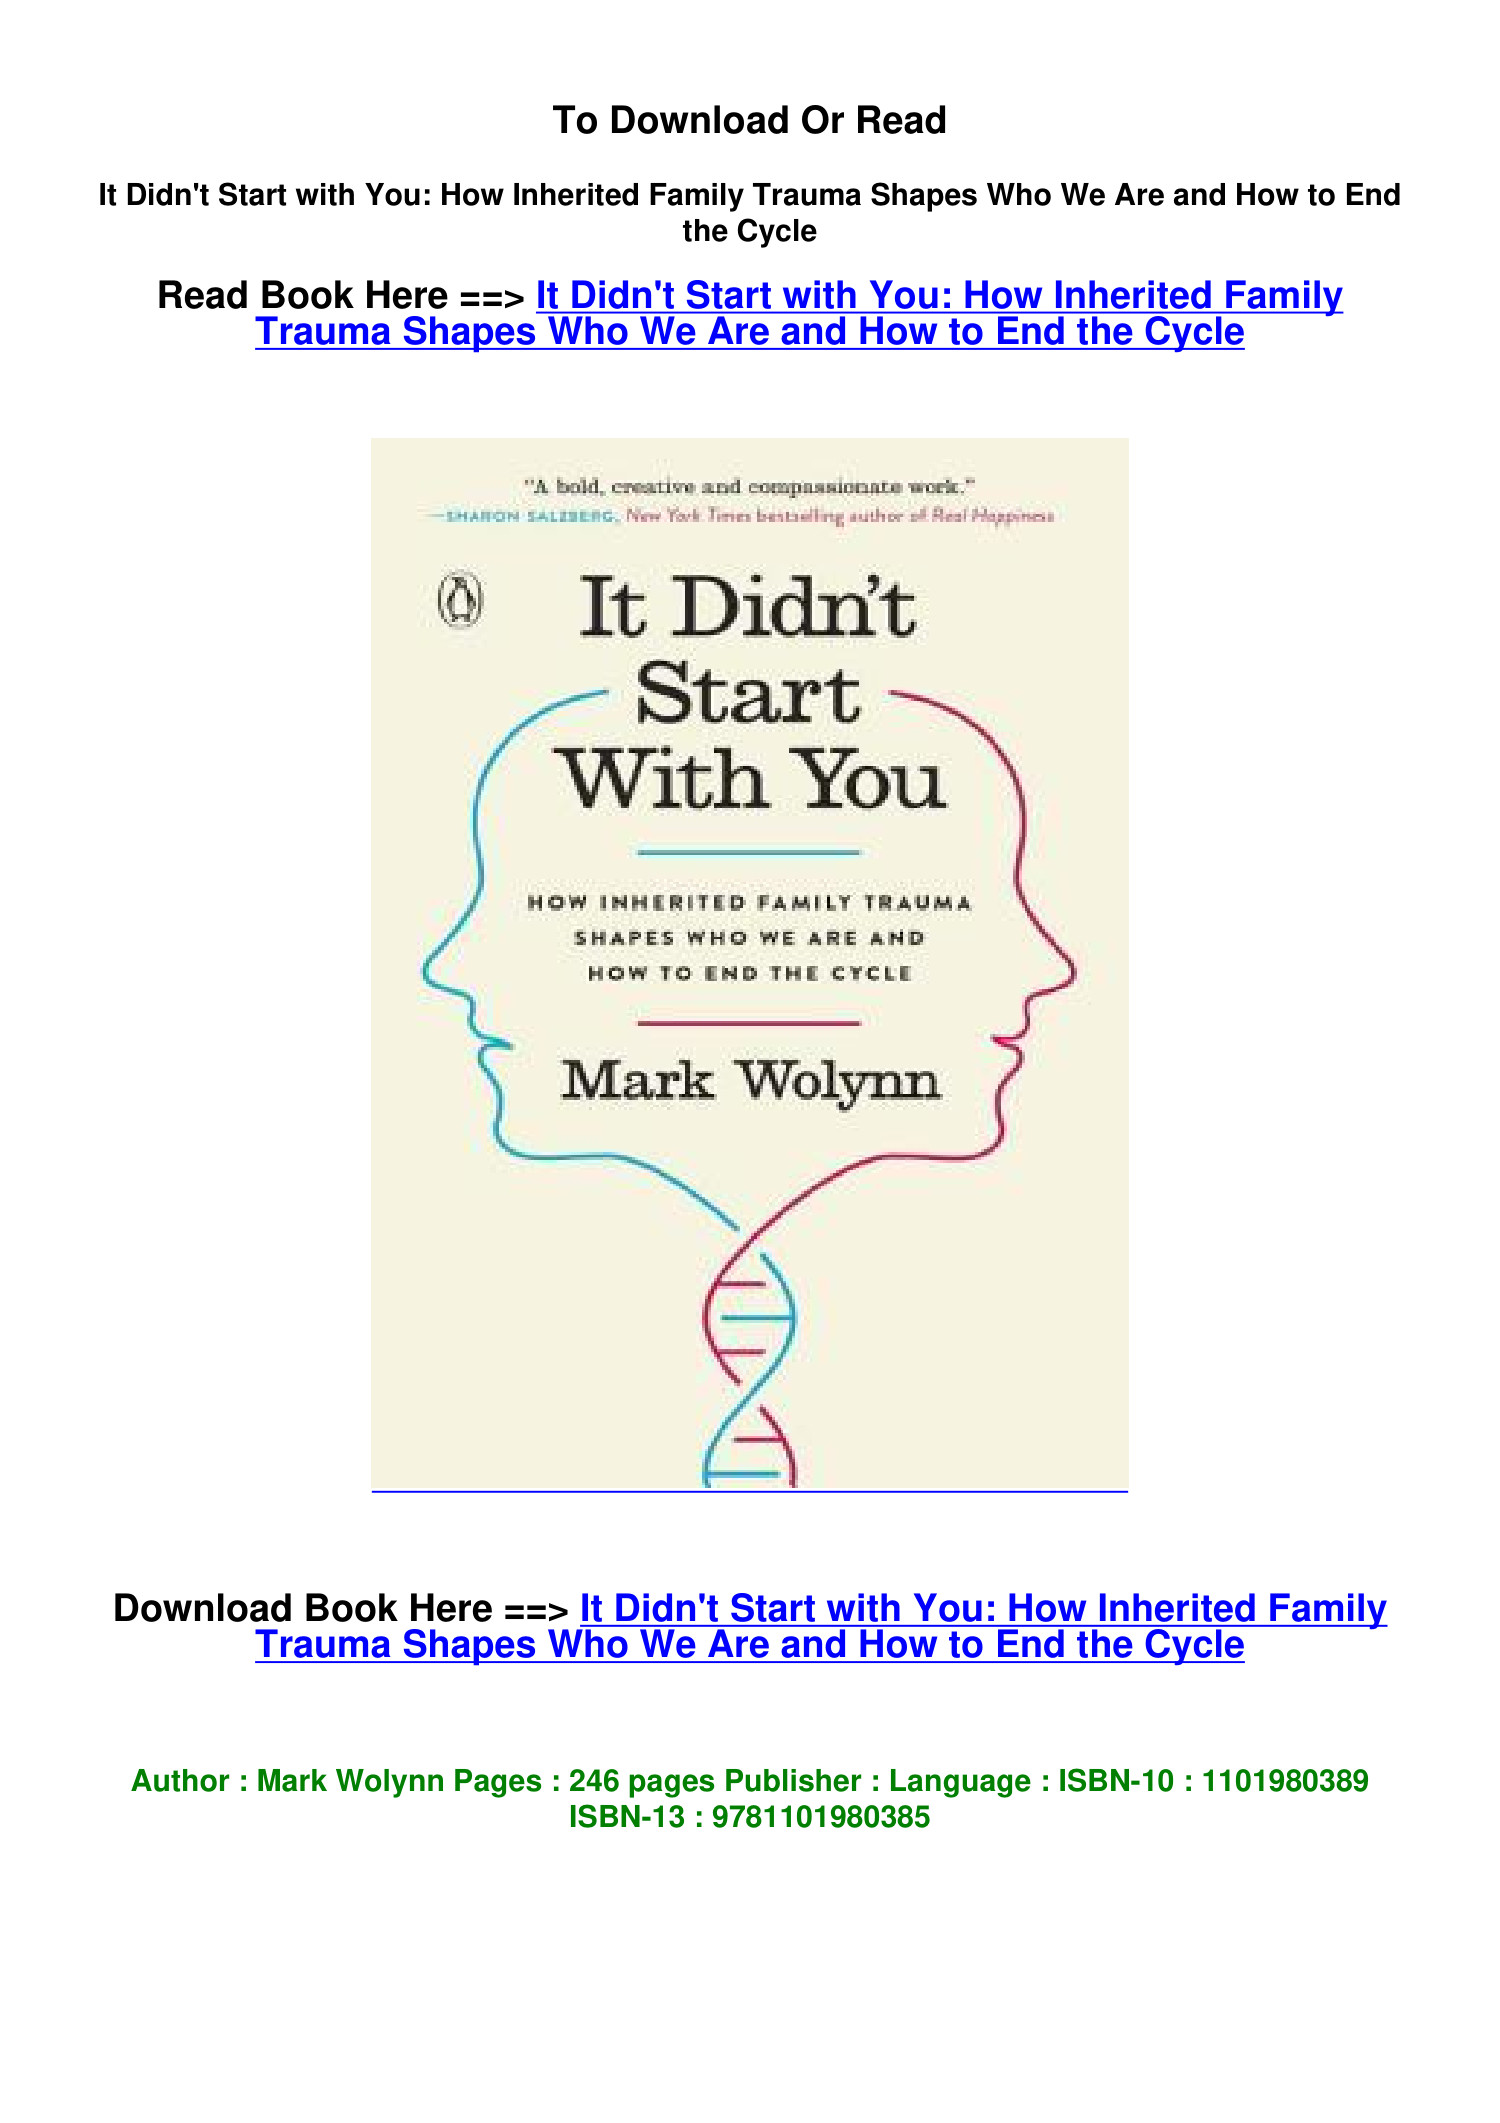 It Didn't Start with You: How Inherited Family Trauma Shapes Who We Are and  How to End the Cycle by Mark Wolynn